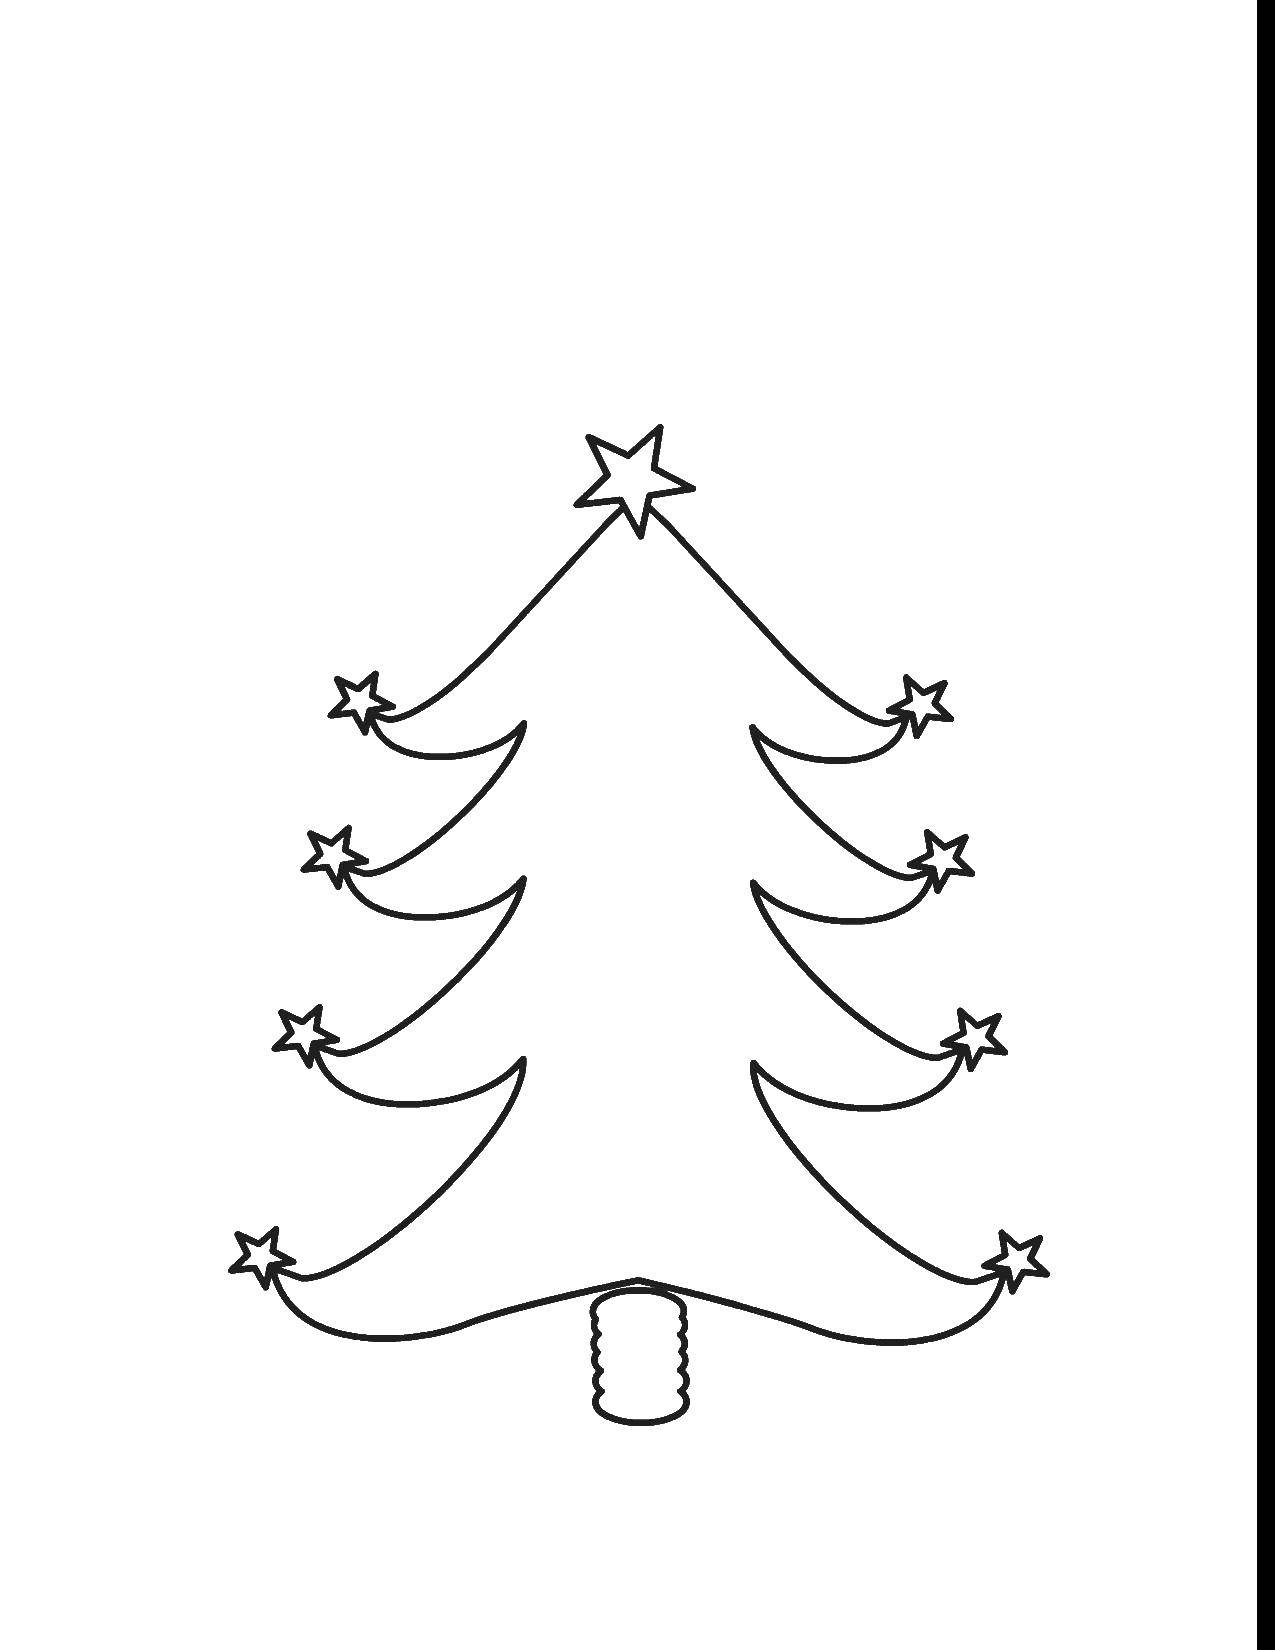 Coloring Tree with stars. Category Christmas. Tags:  tree, tree, star.